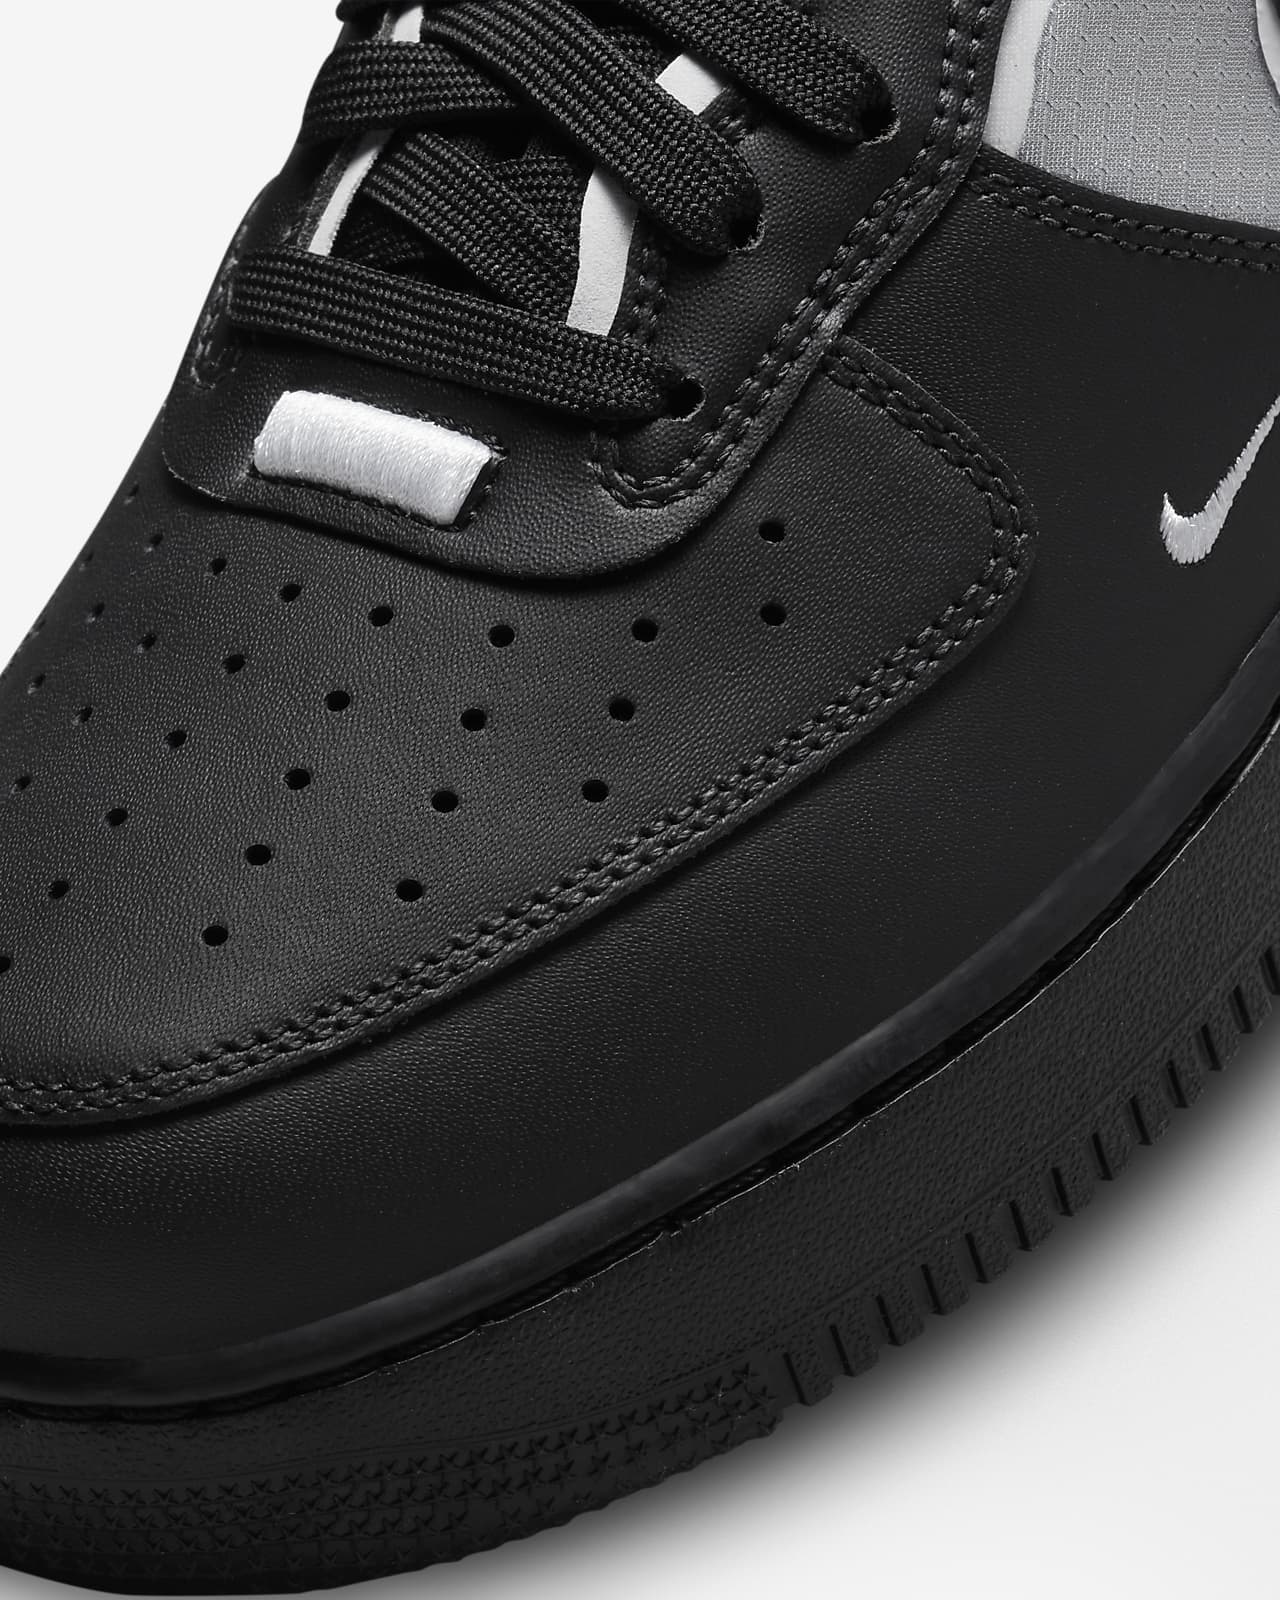 Nike Men's Air Force 1 '07 LV8 Shoes in Black, Size: 10.5 | Dr9866-001